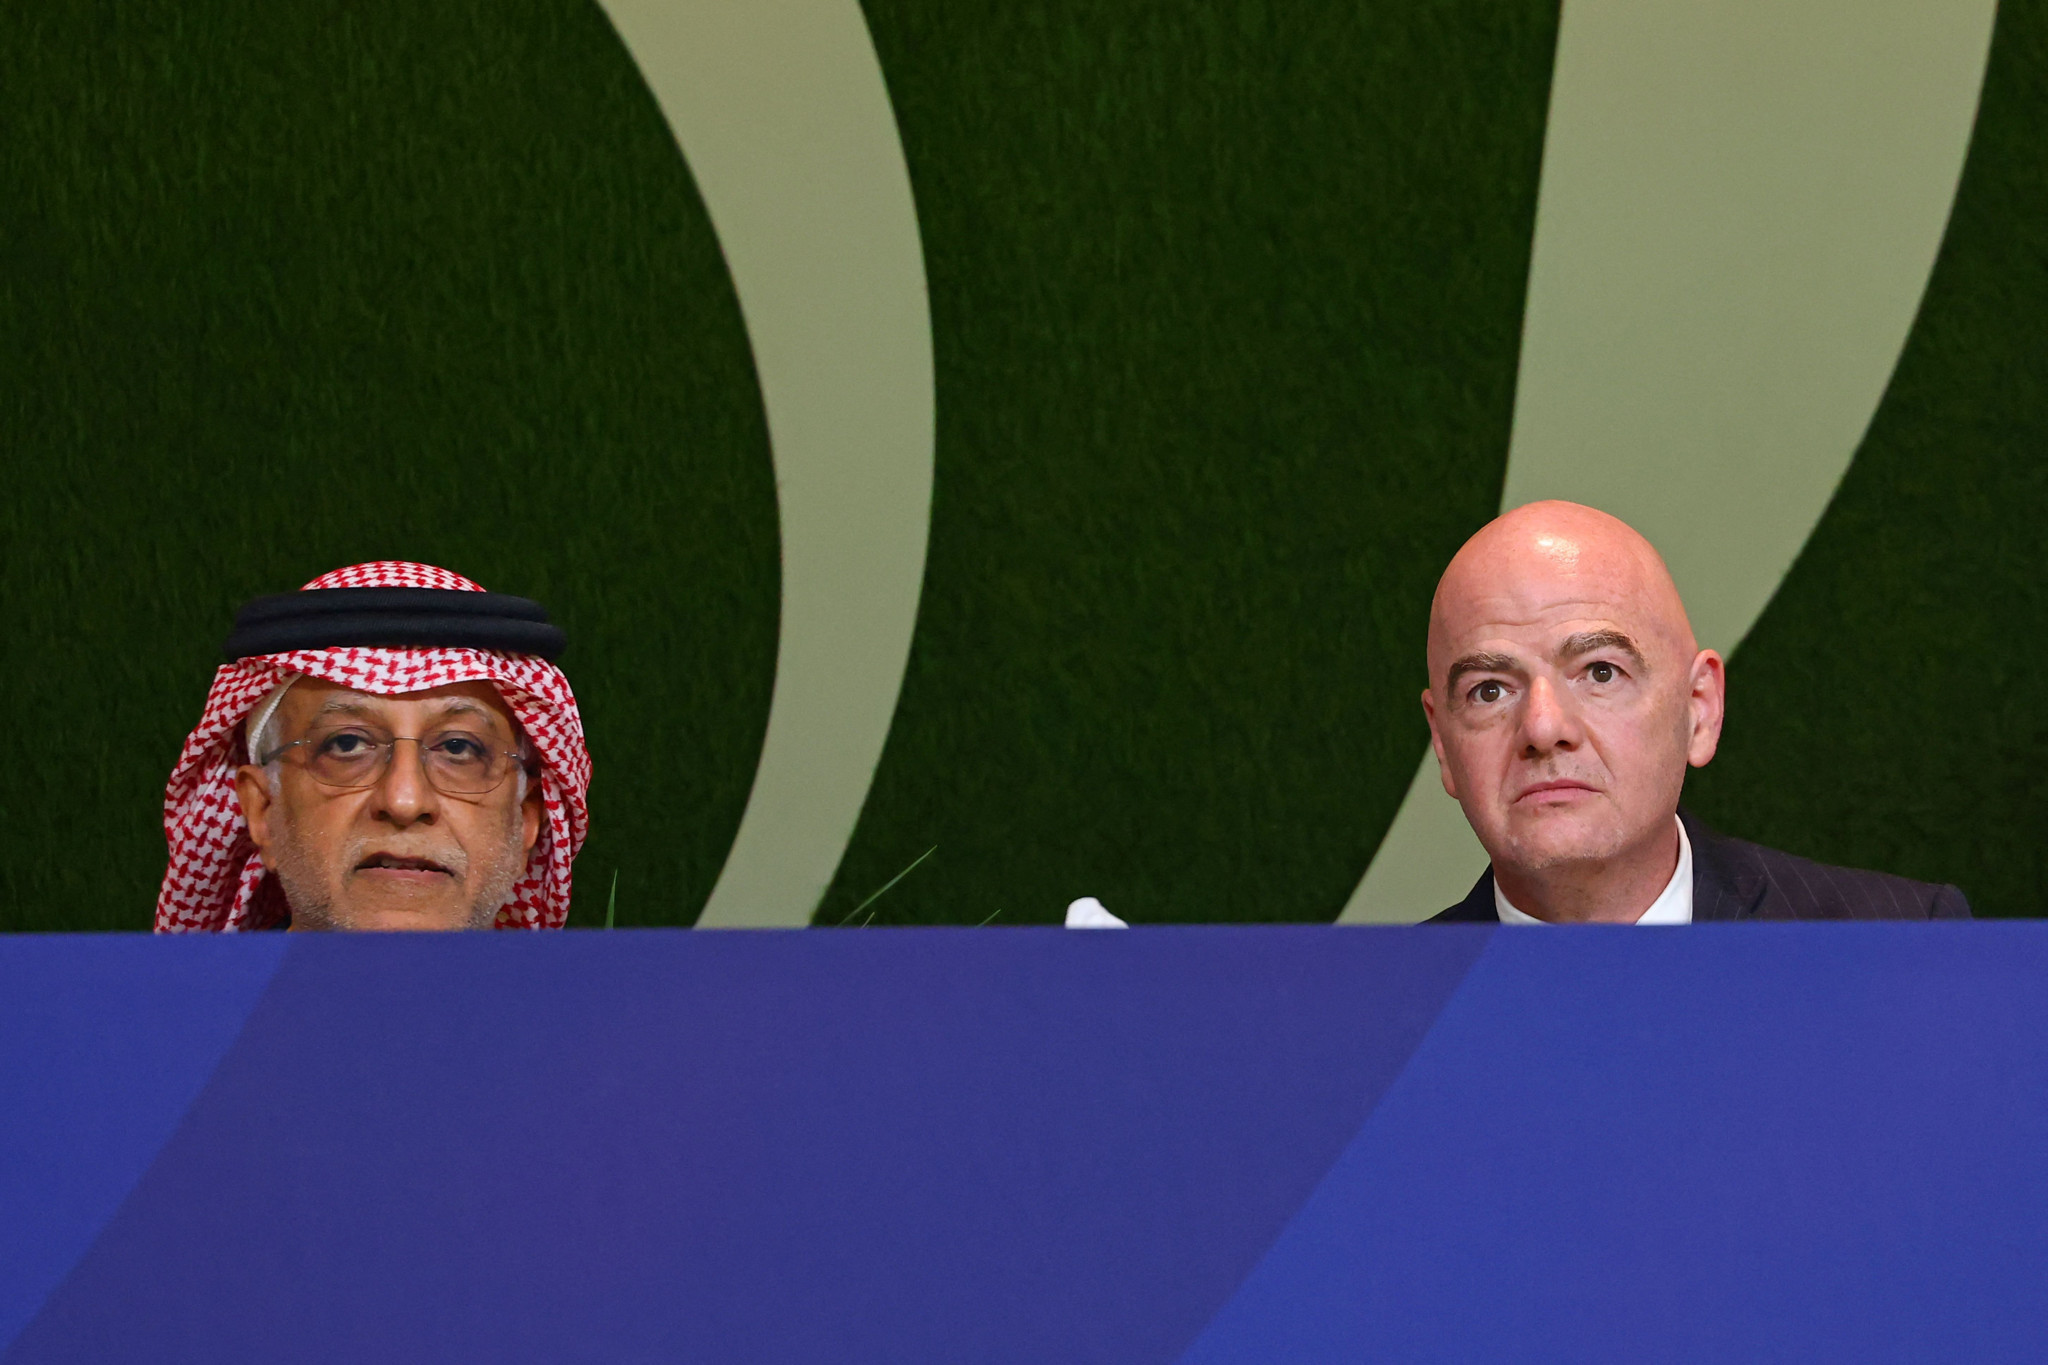 Shaikh Salman bin Ebrahim Al Khalifa, left, is a supporter of Gianni Infantino, right, after previously running against him for FIFA President ©Getty Images